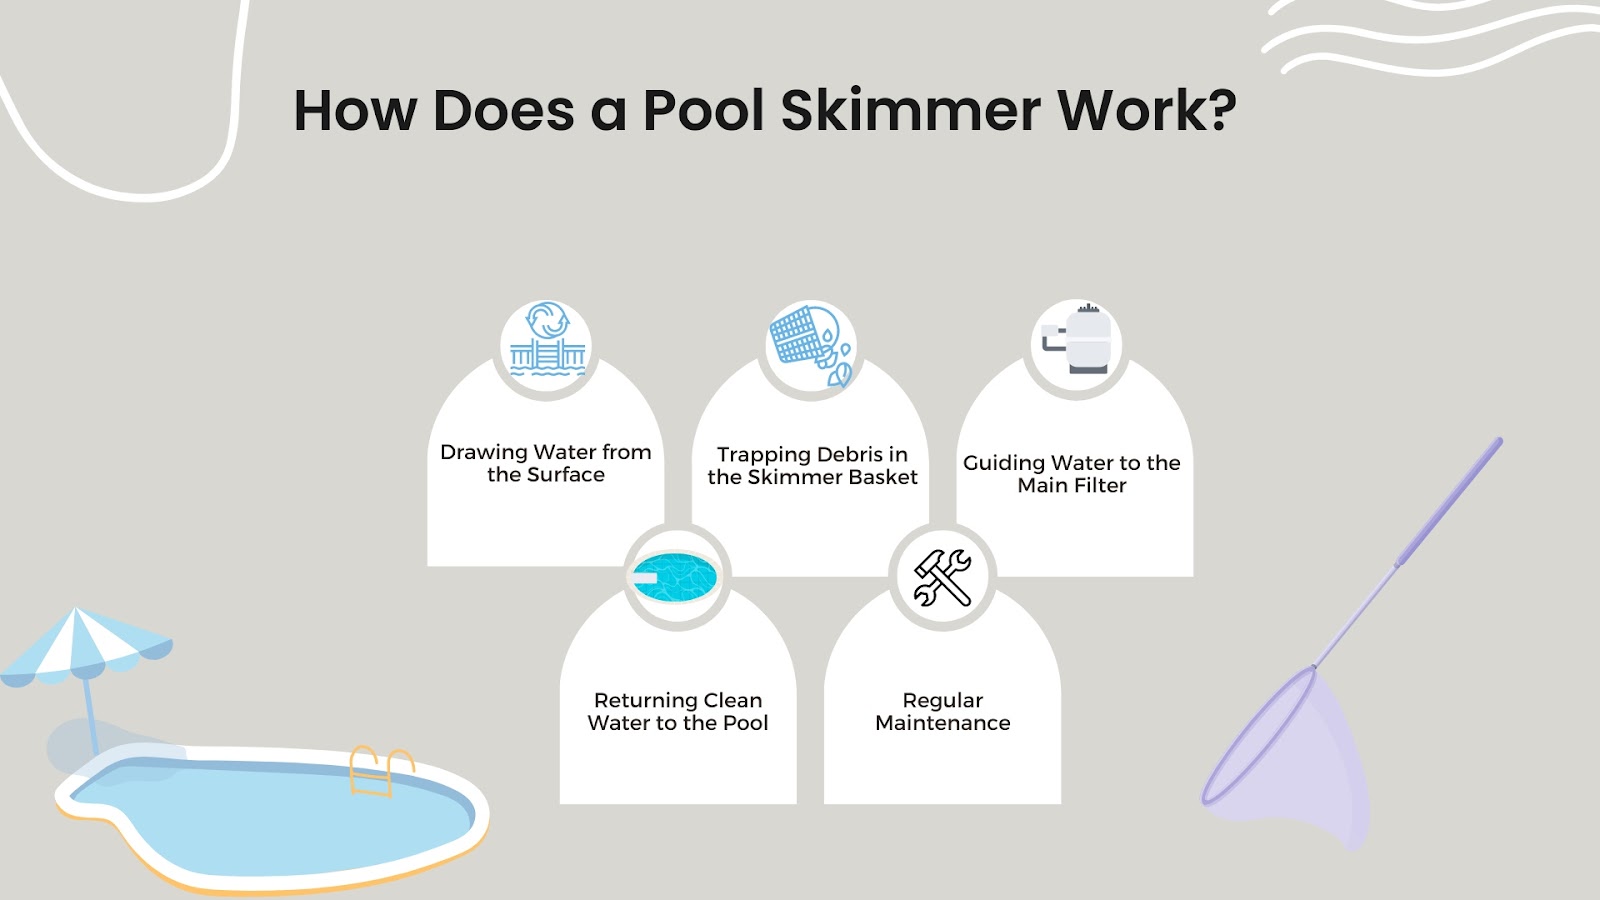 How does a Pool Skimmer Work?